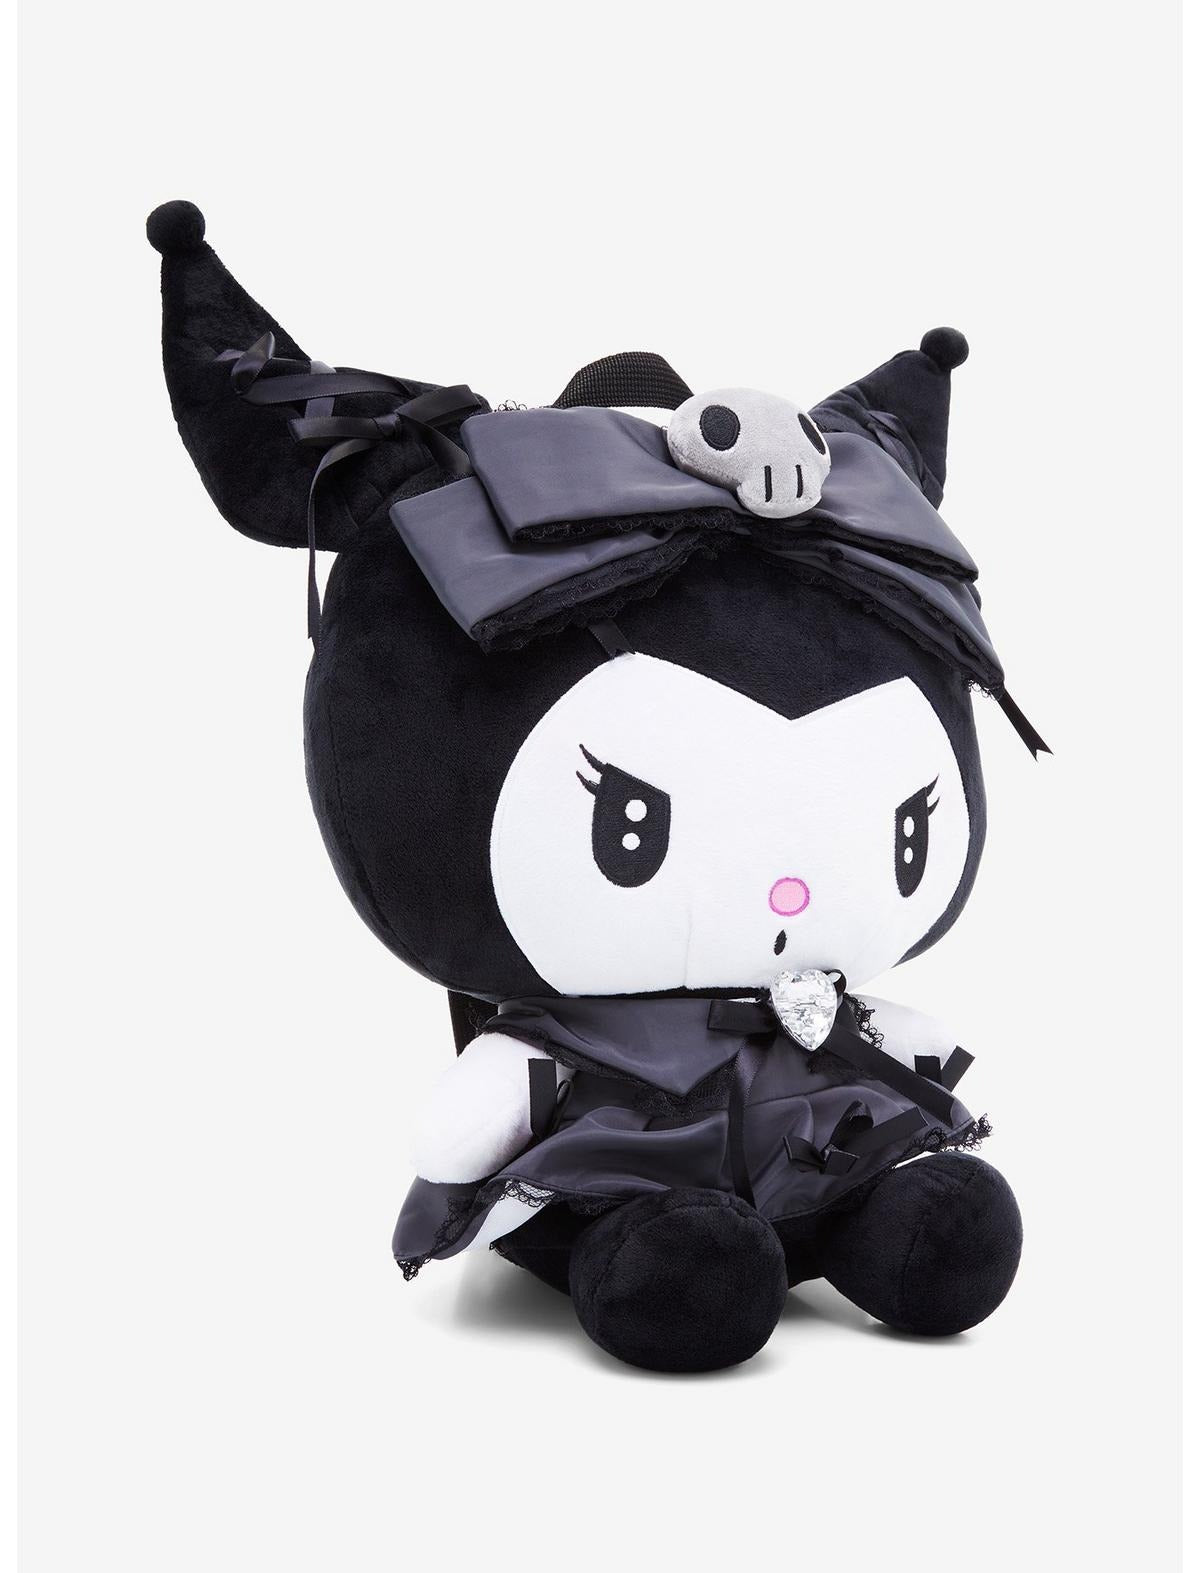 KUROMI Gothic Lolita Black Dress BACKPACK (NEW WITH TAGS, 12" x 19") Sanrio